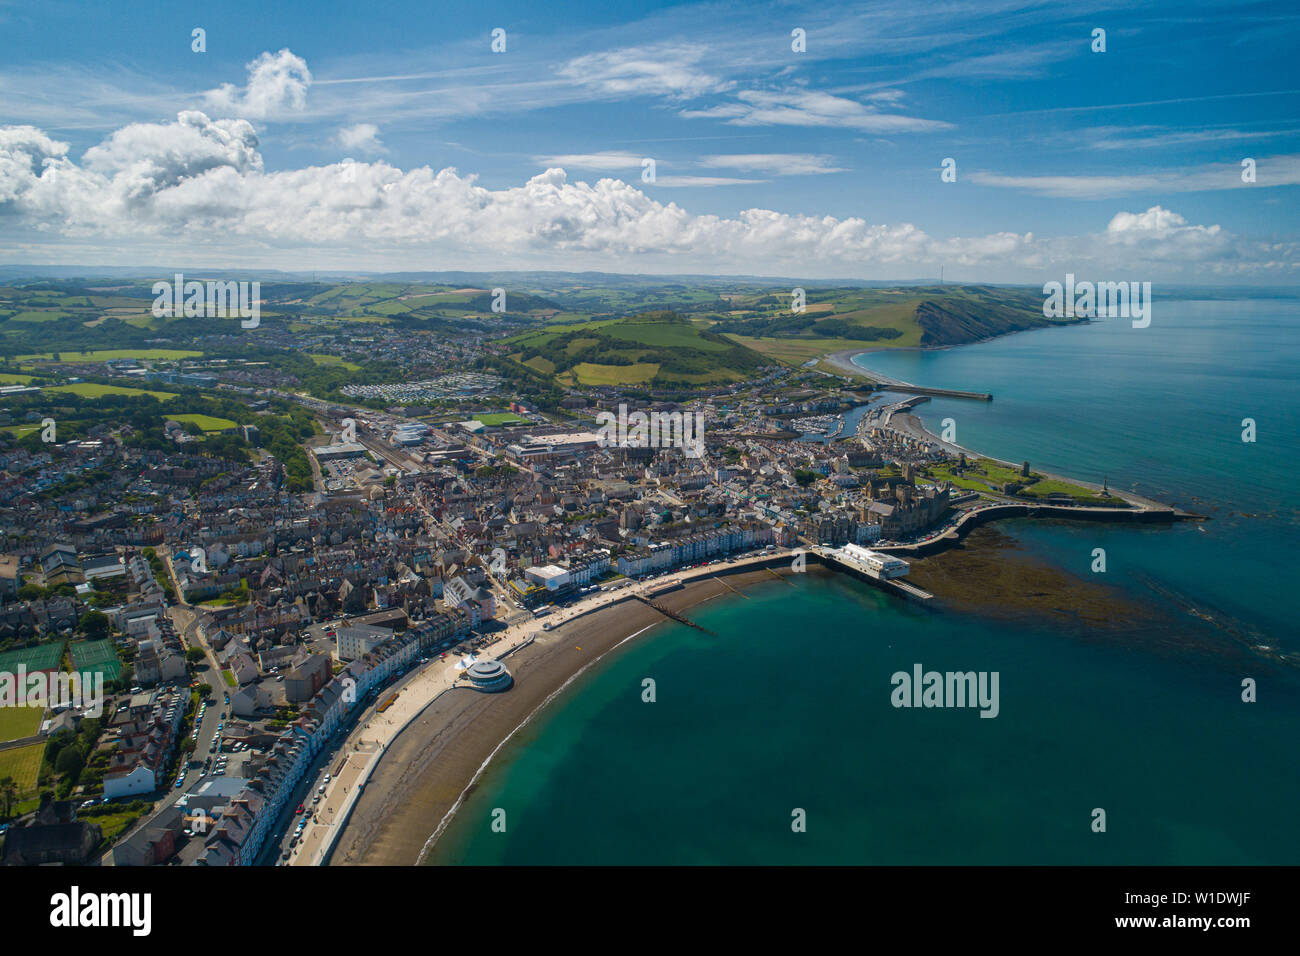 Aberystwyth Wales UK, Tuesday 02 July 2019  UK Weather: A gloriously sunny July morning in Aberystwyth, on the west coast of Wales, as seen from a drone (by a CAA approved commercial operator)  Photo creditt Keith Morris / Alamy Live News Stock Photo